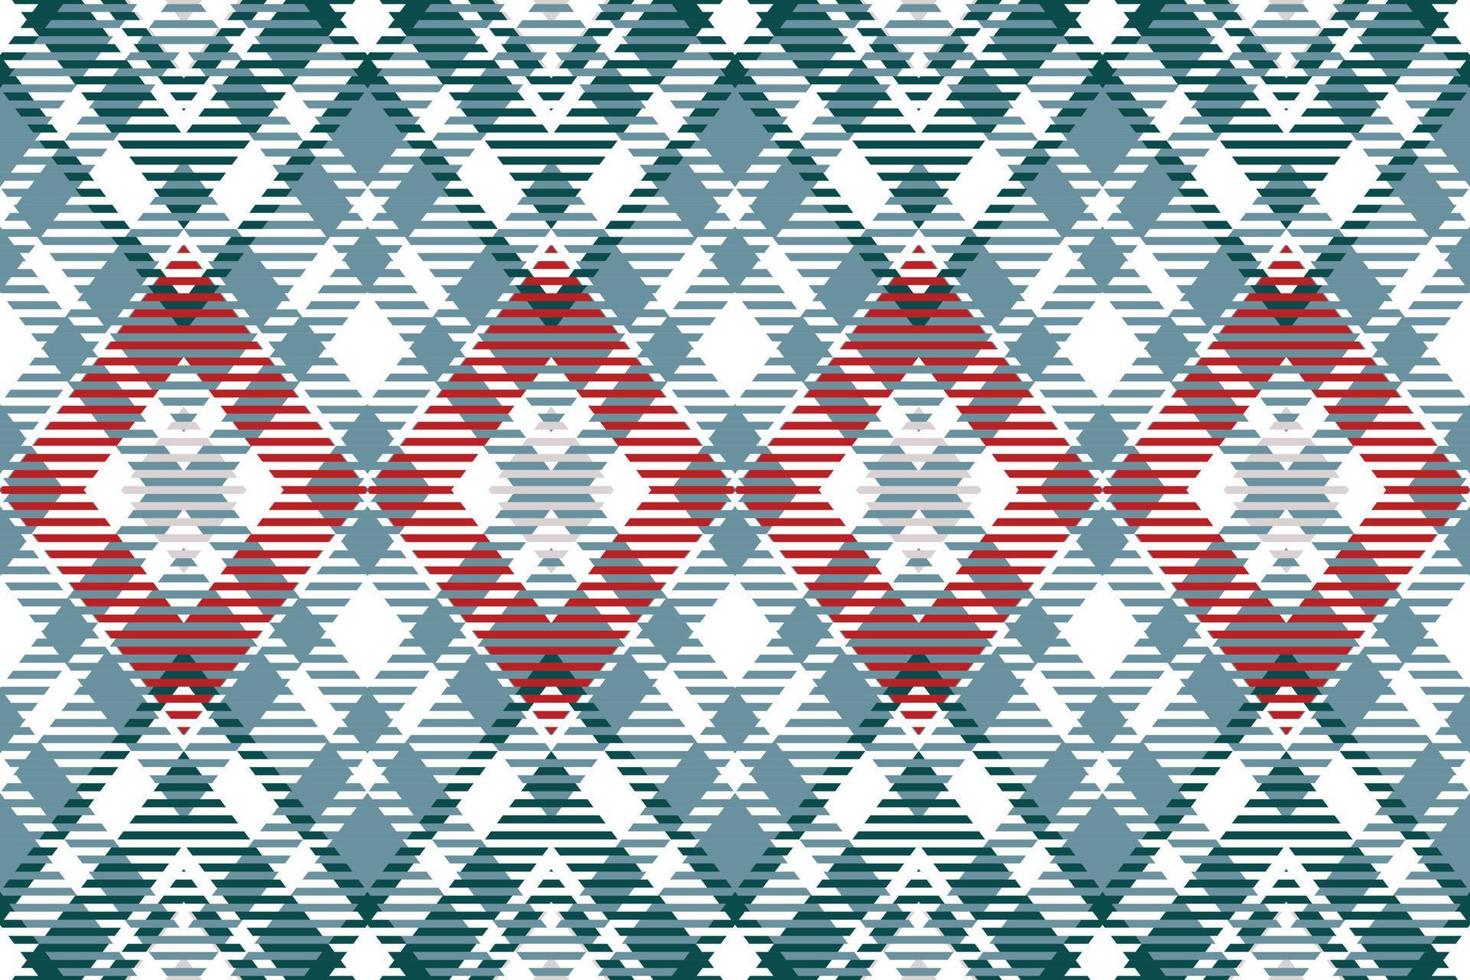 plaid pattern seamless textile is woven in a simple twill, two over two under the warp, advancing one thread at each pass. vector